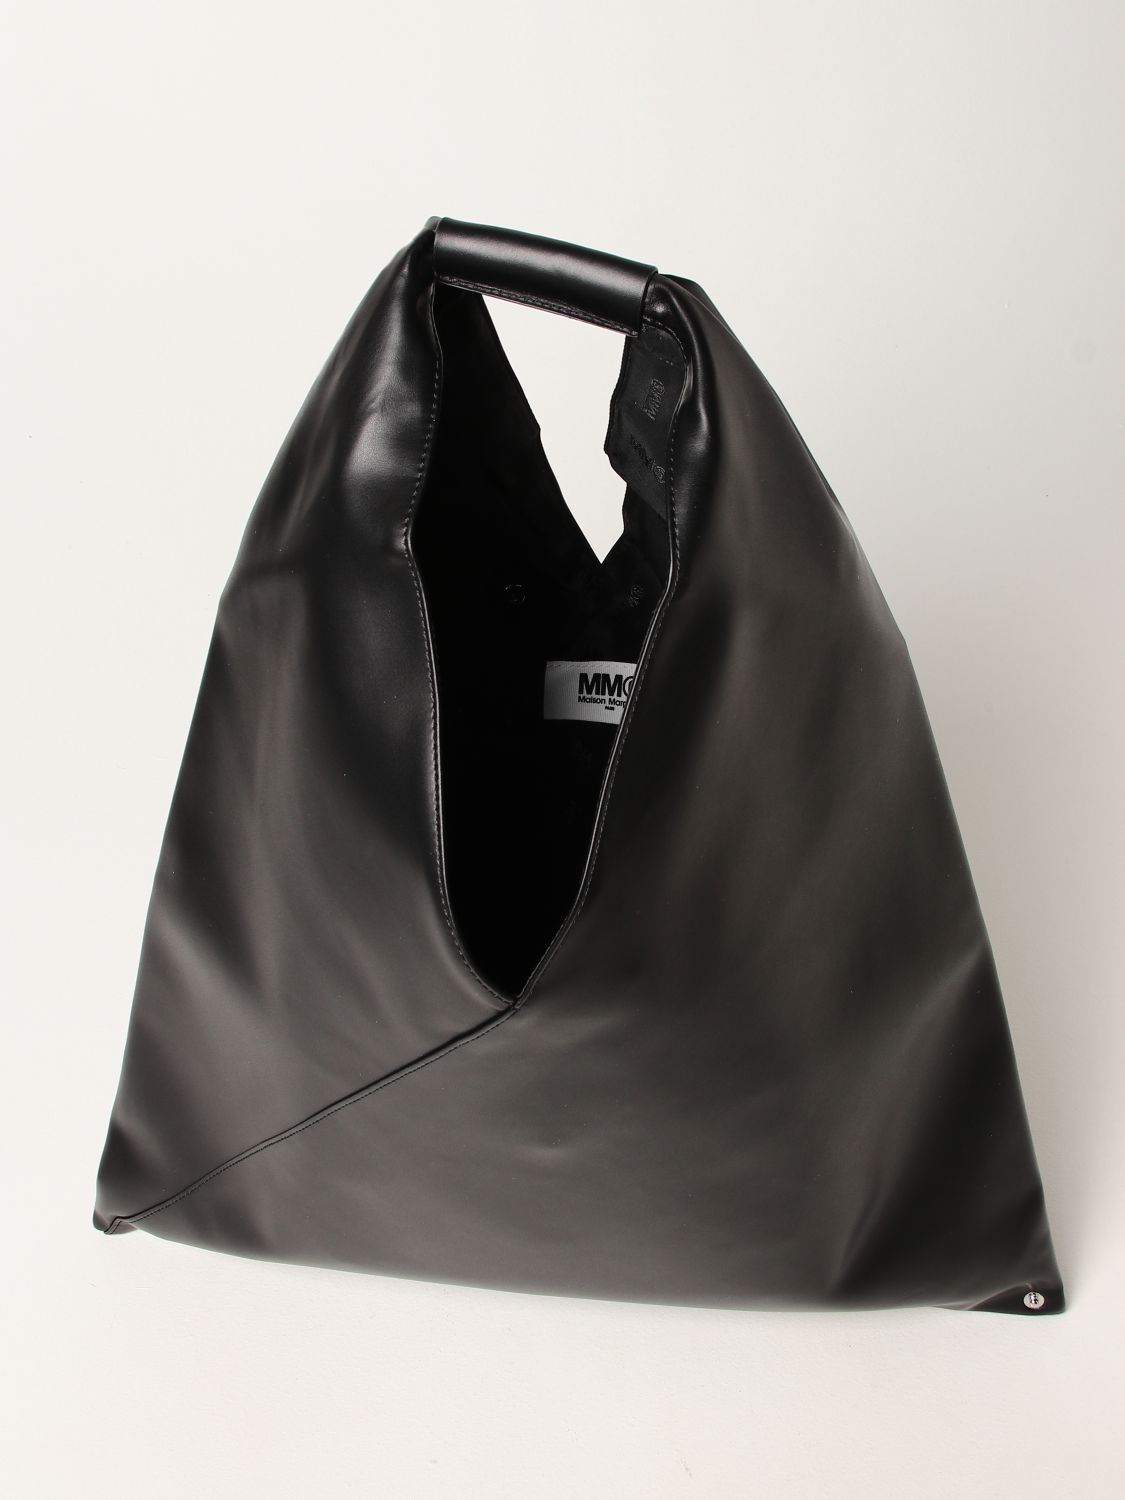 MM6 MAISON MARGIELA: Japanese bag in synthetic leather - Black | Mm6 Maison Margiela tote bags